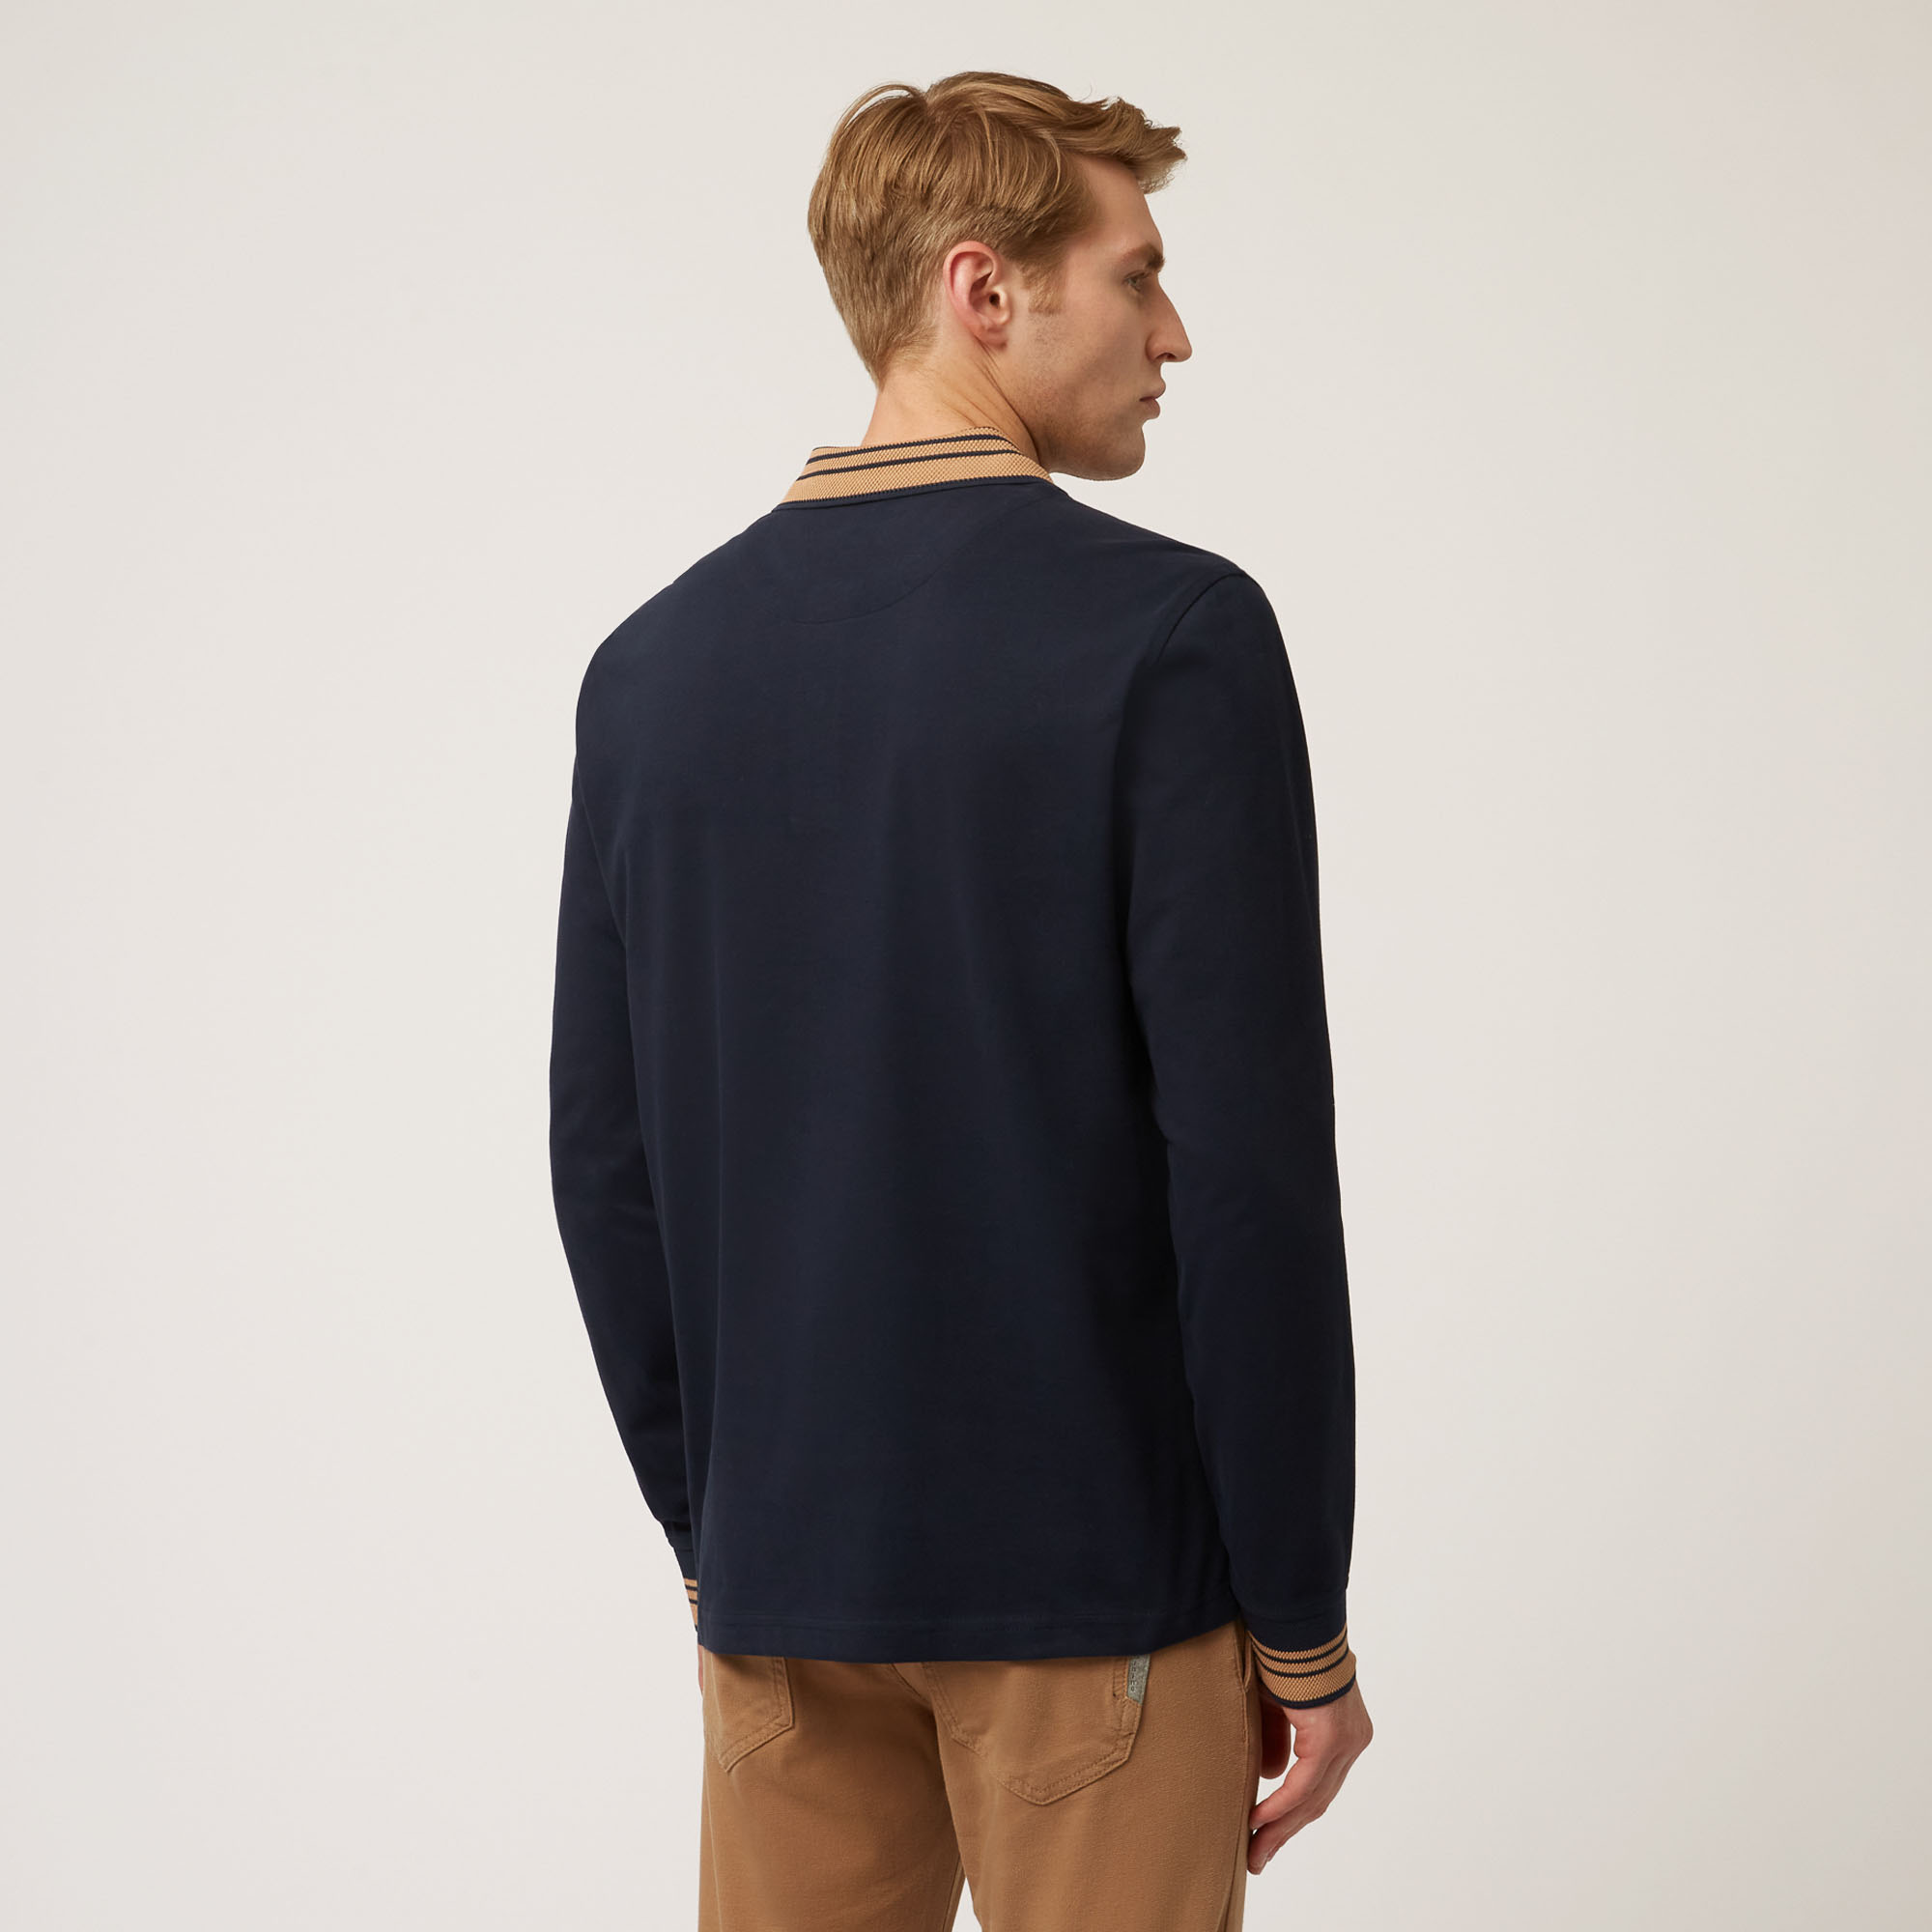 Long-Sleeved Polo Shirt With Contrasting Cuffs And Collar